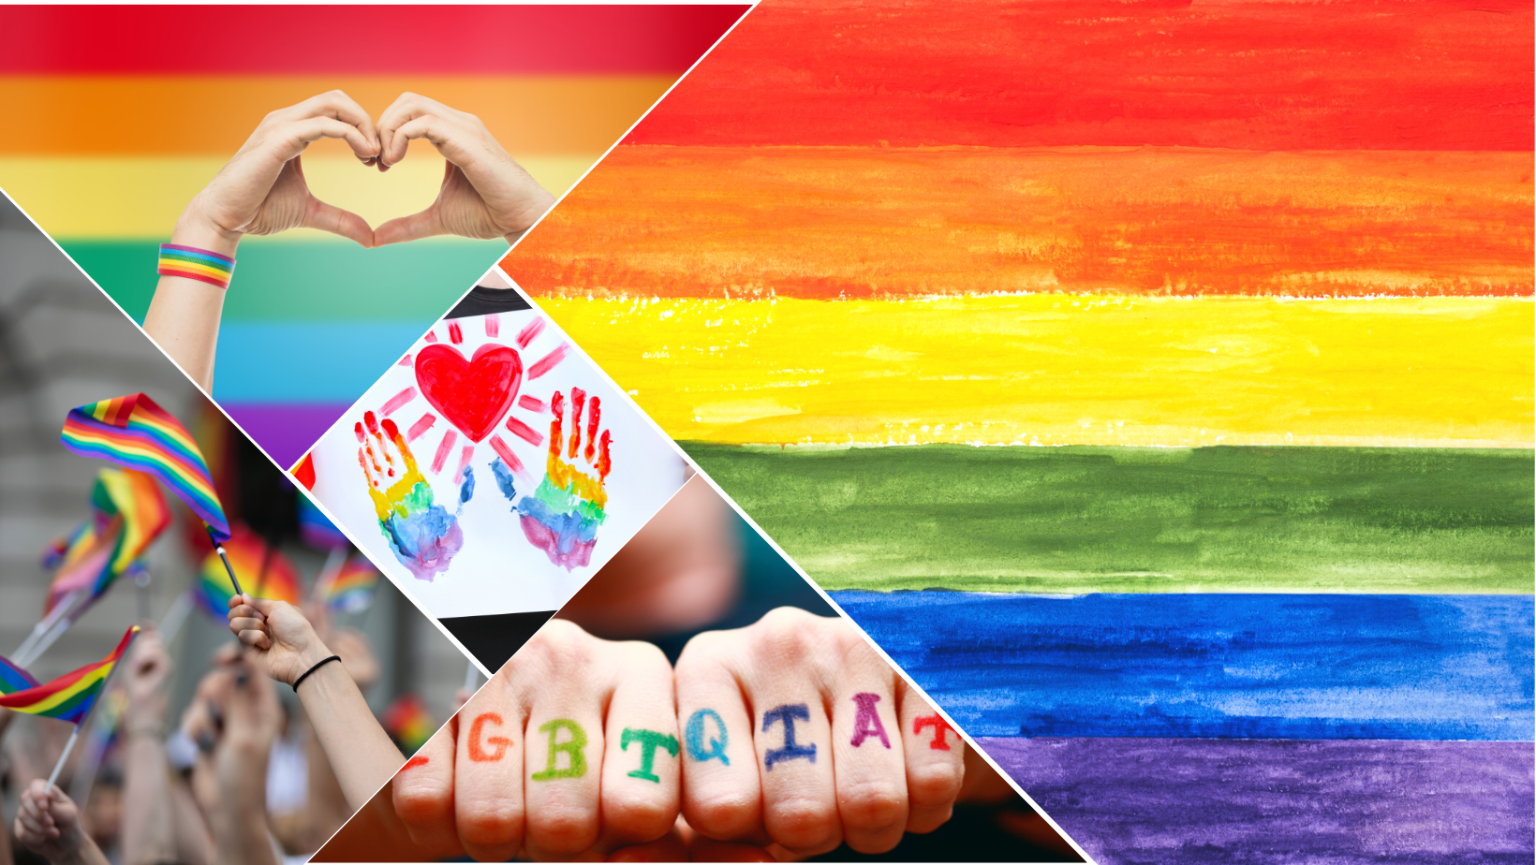 Collage of pride-themed images: A rainbow, hands with a rainbow background forming a heart, hand prints in rainbow paint